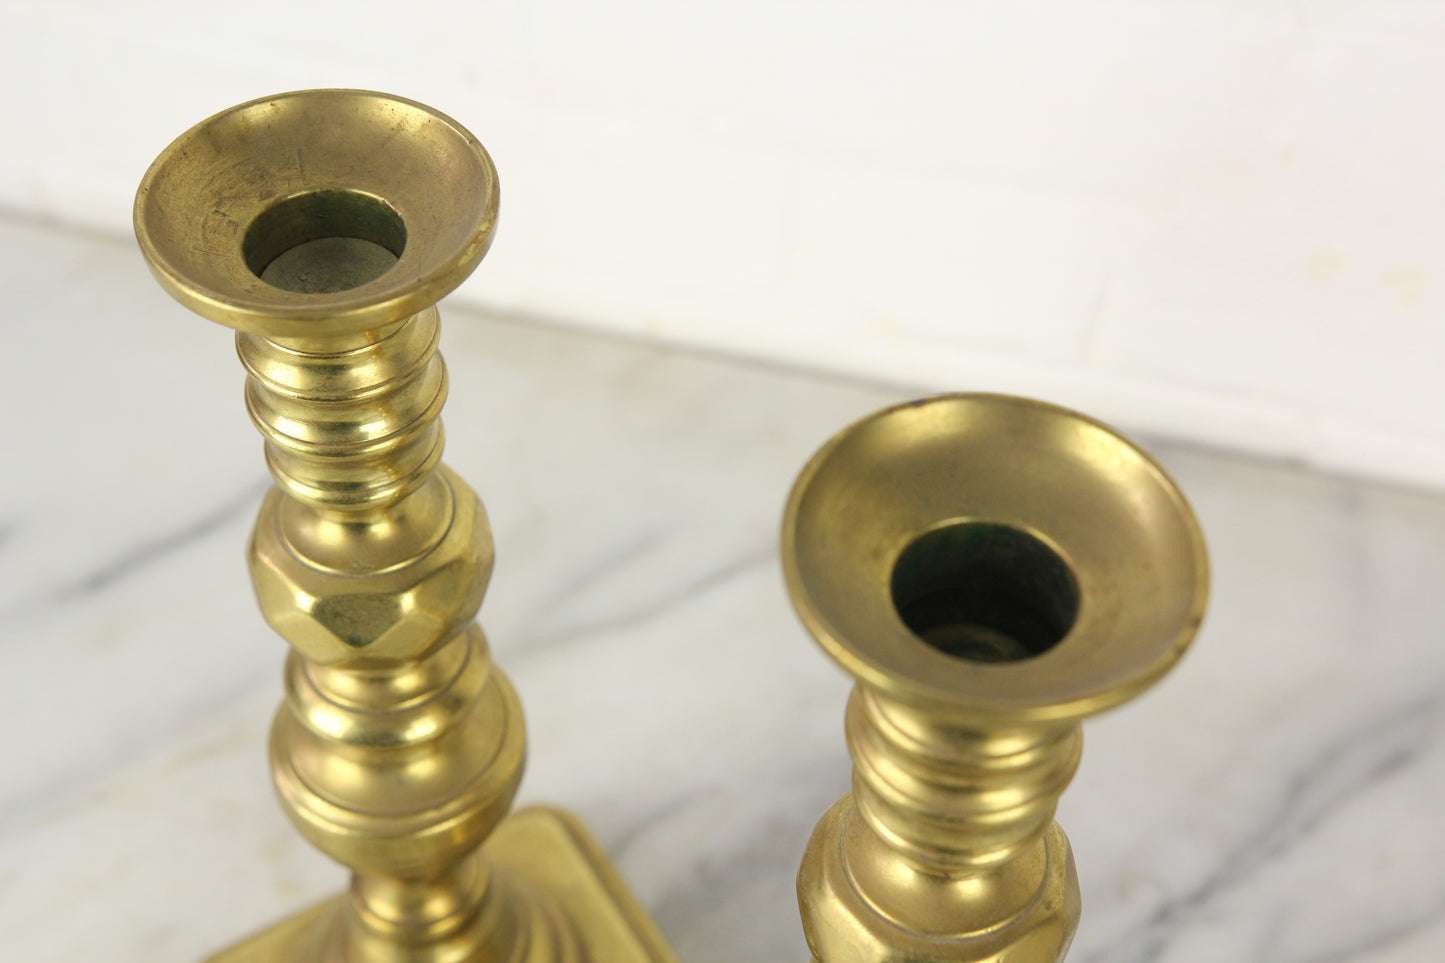 Solid Brass Push-Up Candlesticks, Pair - 9.75"